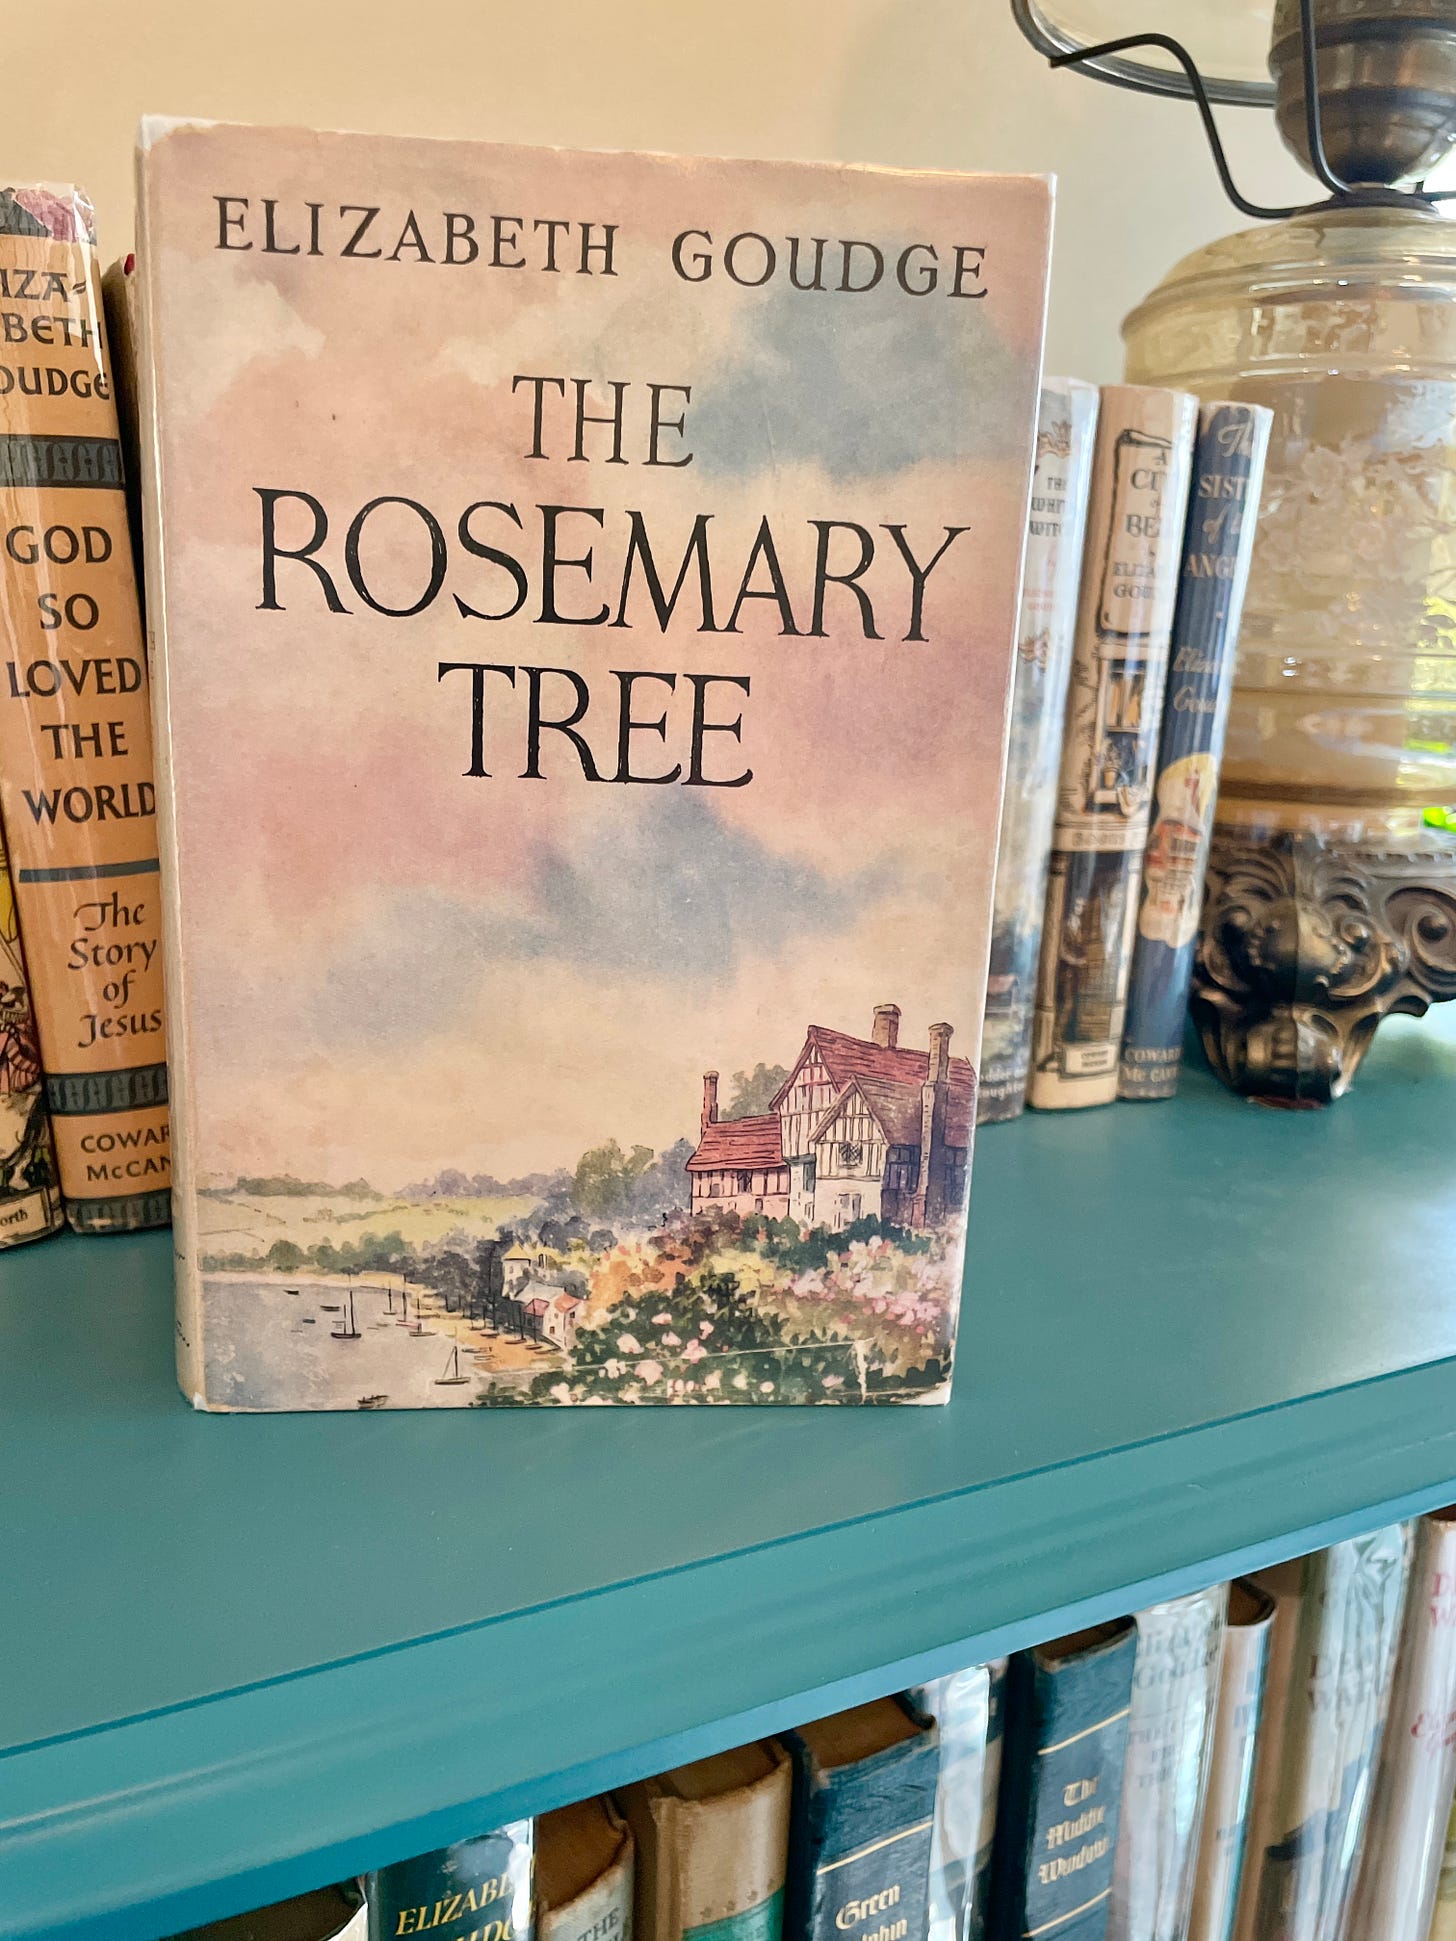 A beautiful old dust cover on a first edition of The Rosemary Tree by Elizabeth Goudge